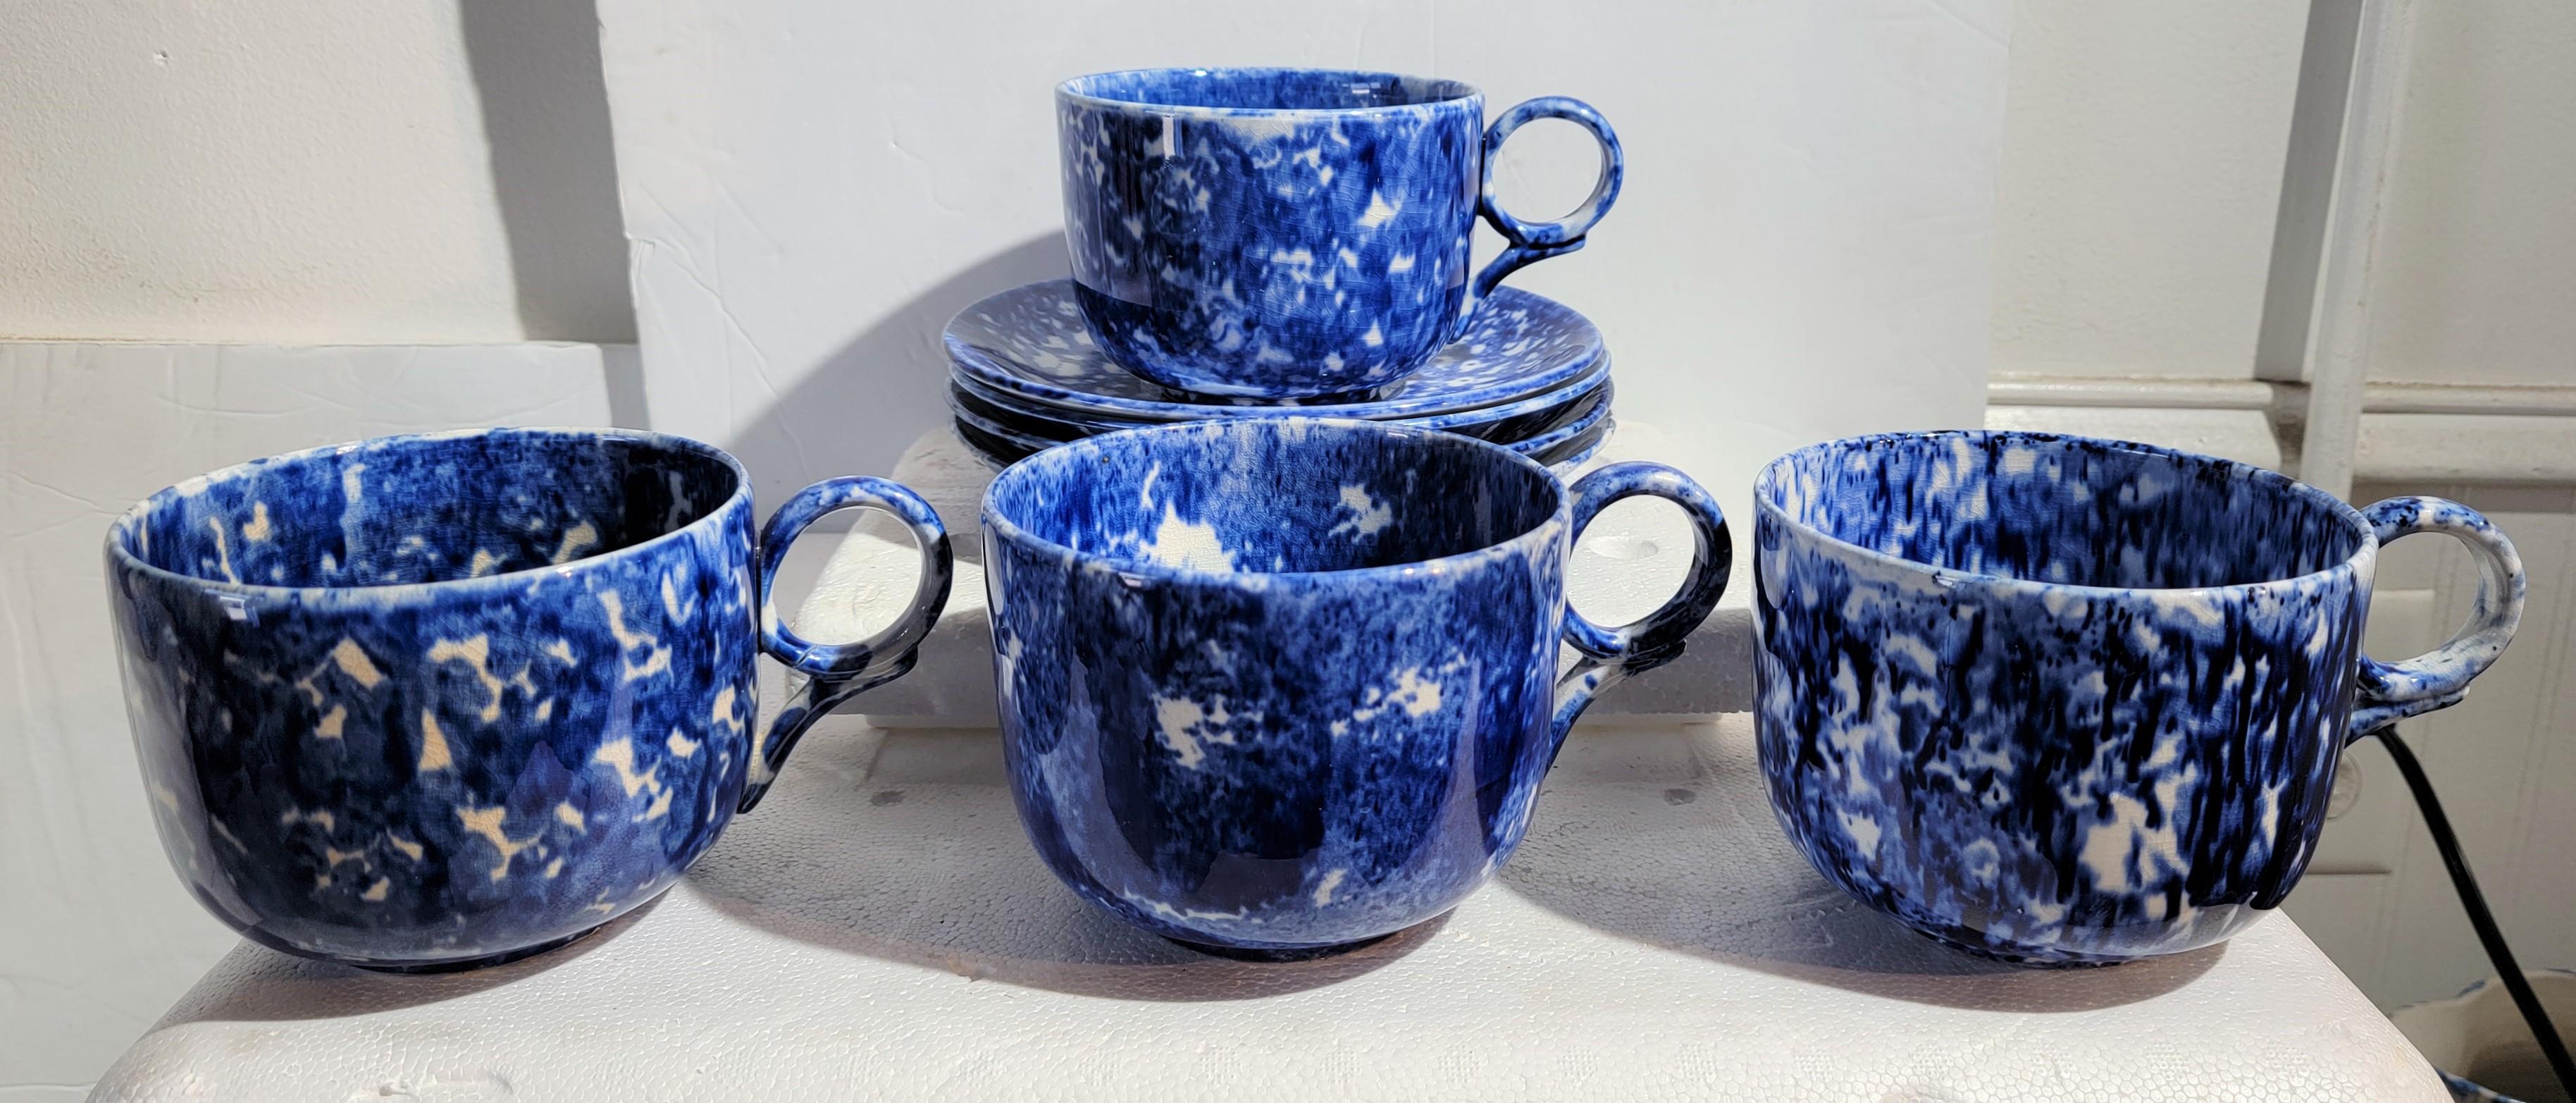 This matching set of four 19thc sponge ware mush cups and saucers are in pristine condition.Many different shades of blues.Found in Pennsylvania private collection. Sold as a set of Four cups & saucers.

Saucers measure 7 inches in diameter and 1